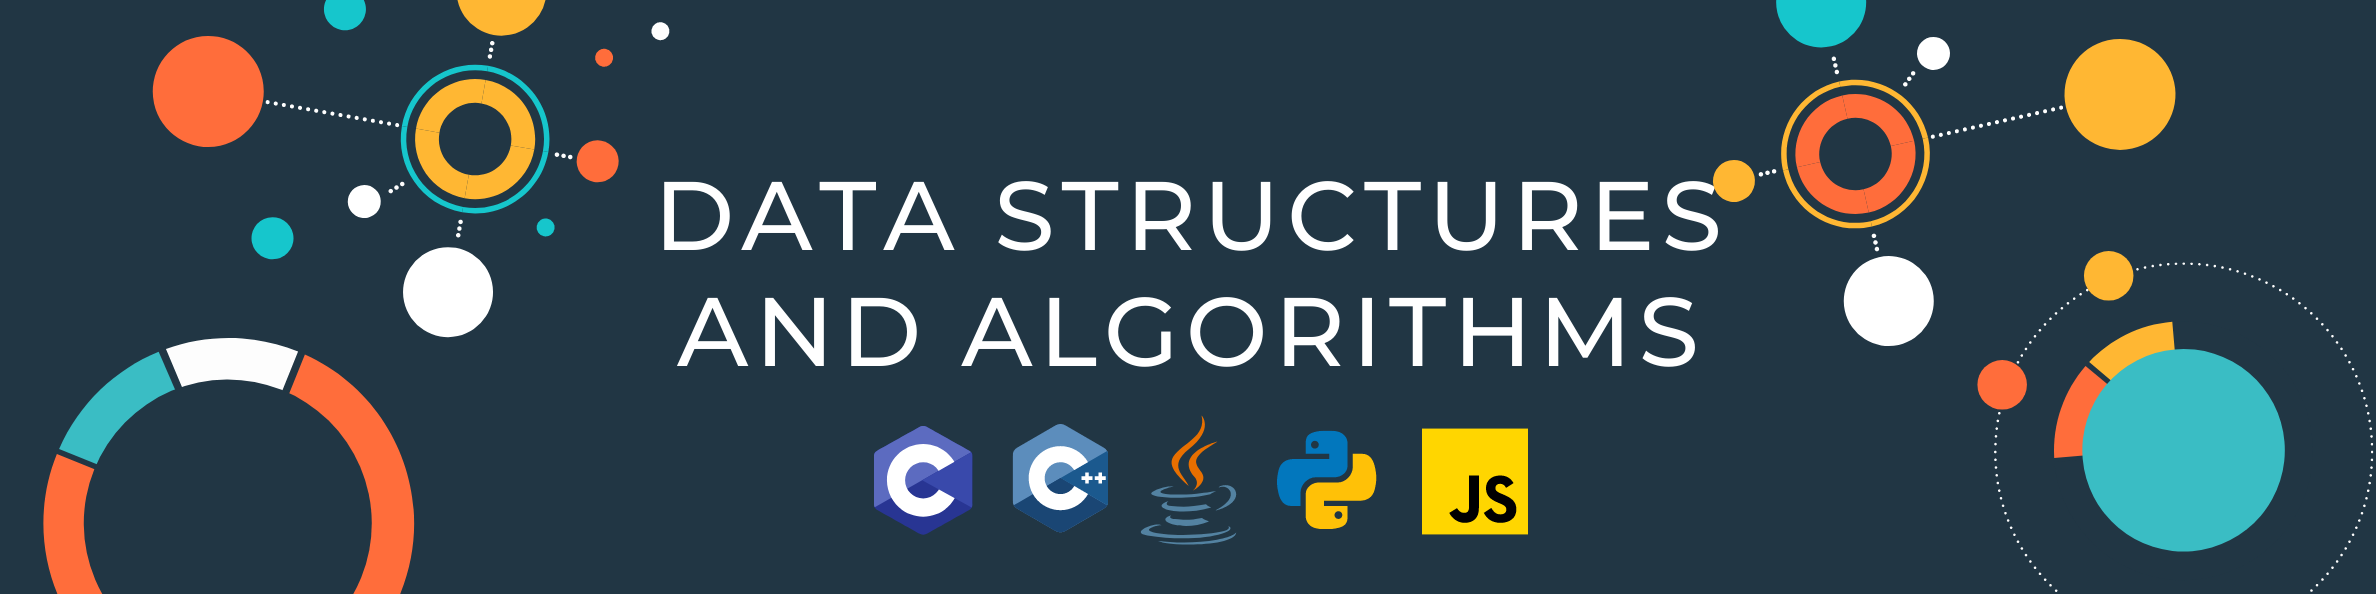 Data-Structures-and-Algorithms